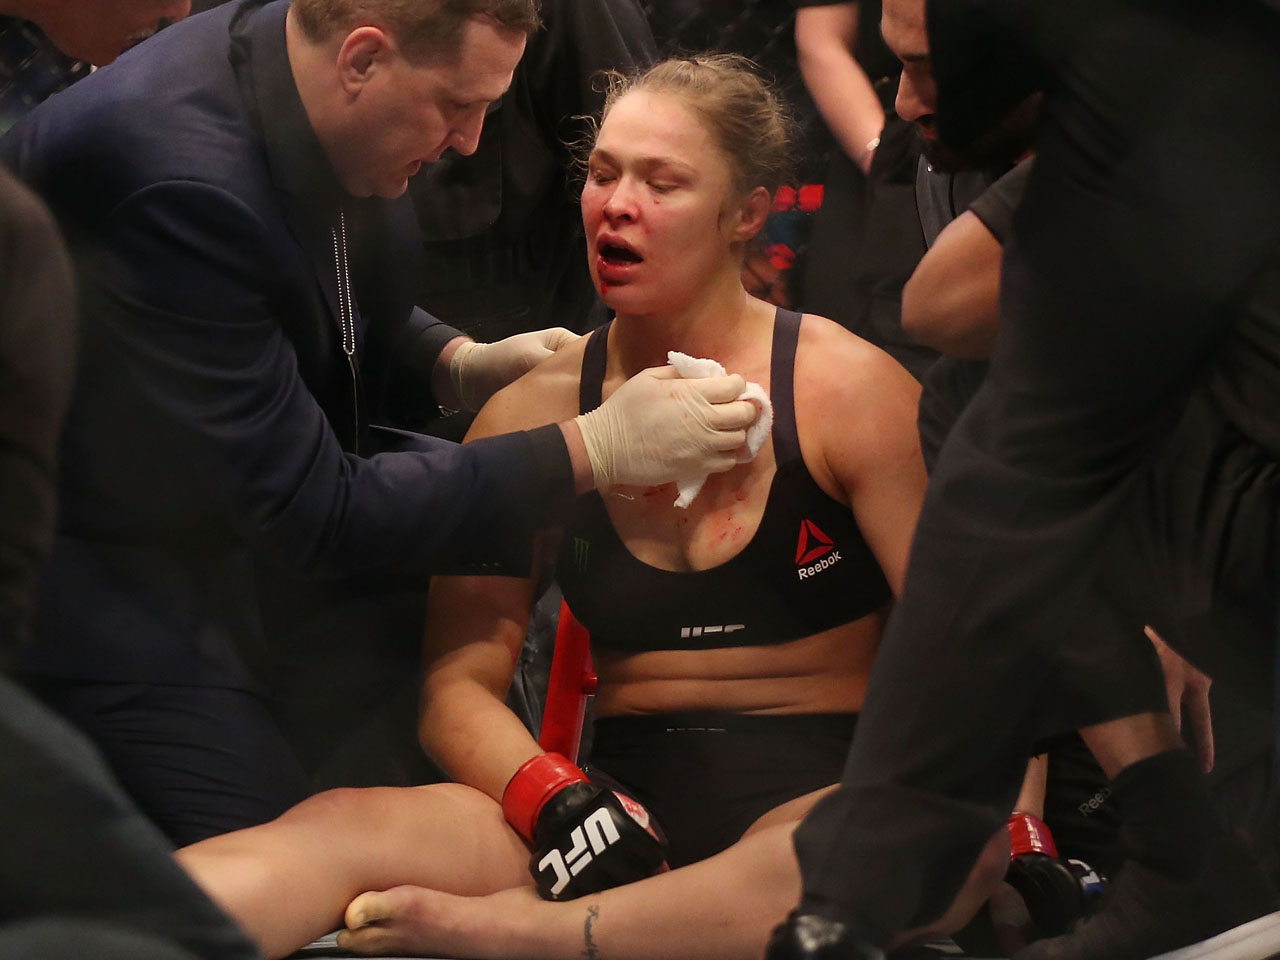 Ronda Rousey is knocked out by Holly Holm in UFC title fight - Los